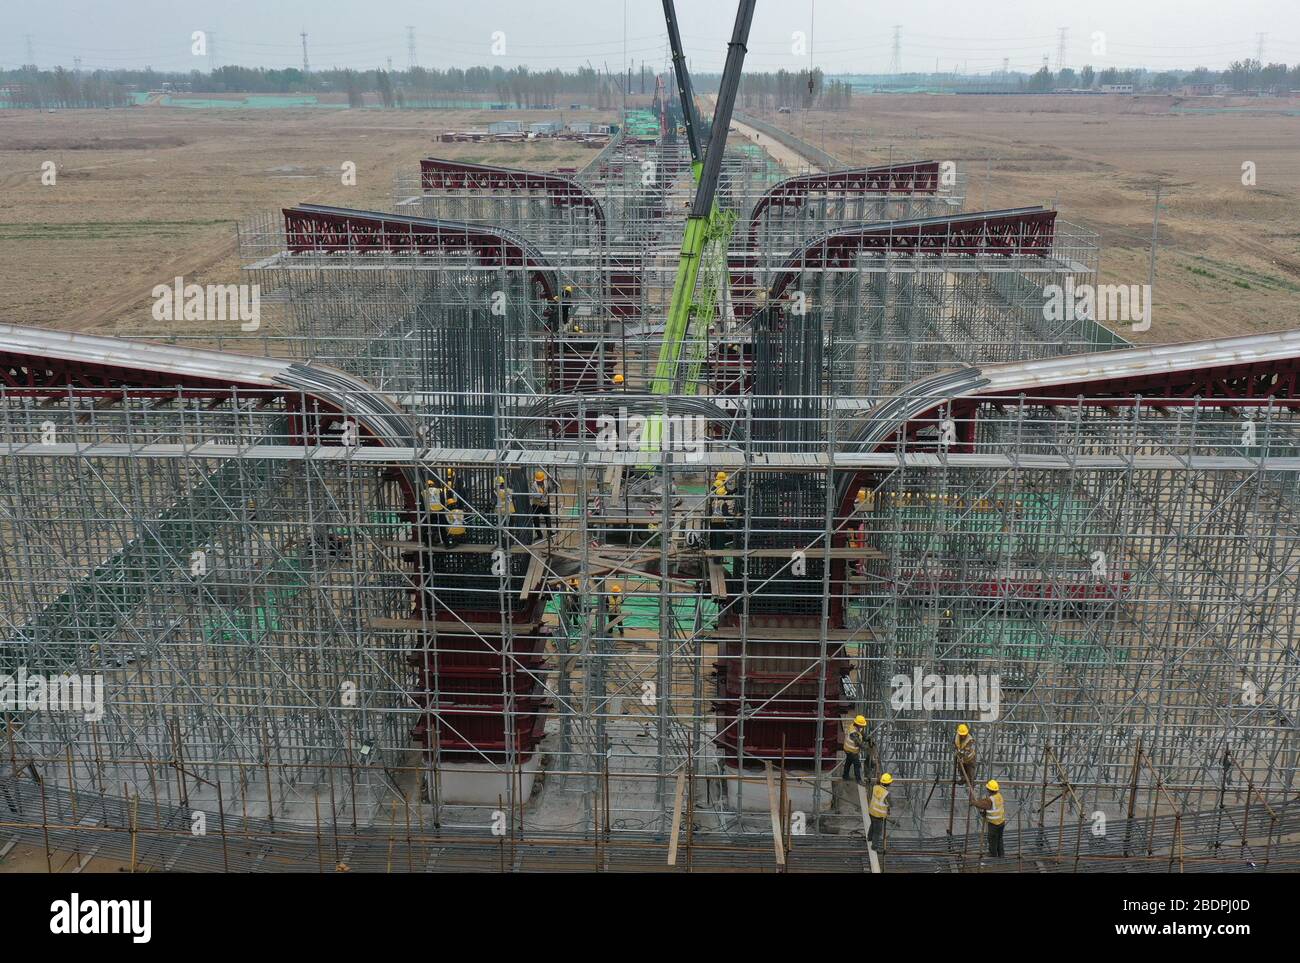 Xiongan. 9th Apr, 2020. Aerial photo taken on April 9, 2020 shows people working at the construction site of the Langouwa grand bridge of the Beijing-Xiongan expressway in Xiongan New Area, north China's Hebei Province. The Beijing-Xiongan expressway which connects China's capital city of Beijing and Xiongan New Area, located about 100 km southwest of Beijing, is under construction in an orderly manner and expected to open to traffic by 2021. Credit: Yang Shiyao/Xinhua/Alamy Live News Stock Photo